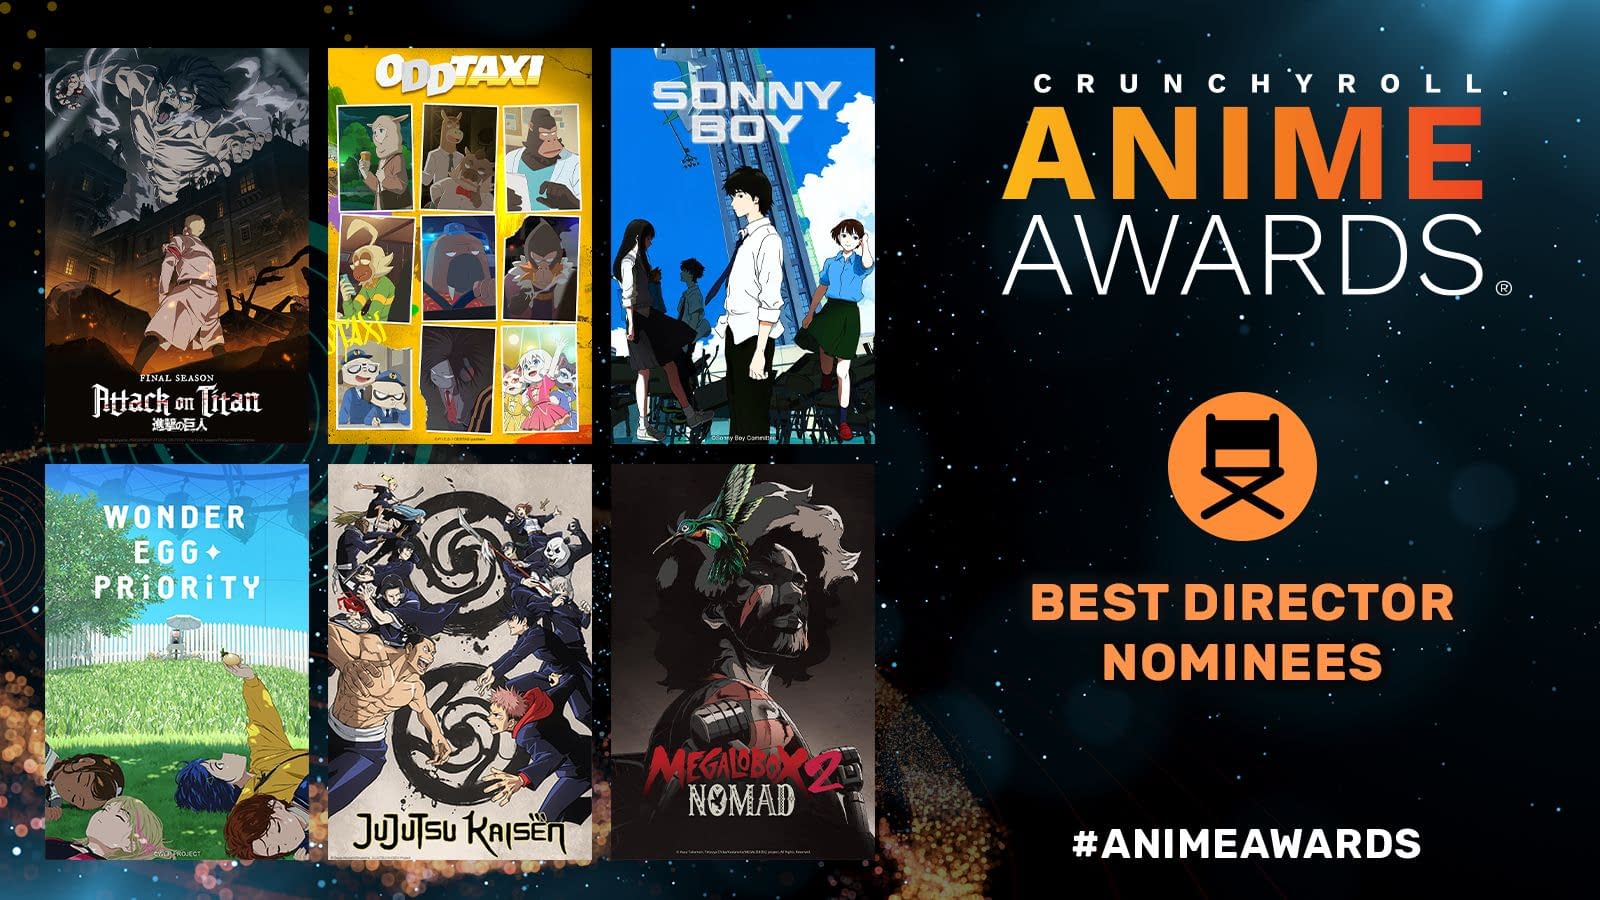 Vote Now in This Year's Crunchyroll Anime Awards